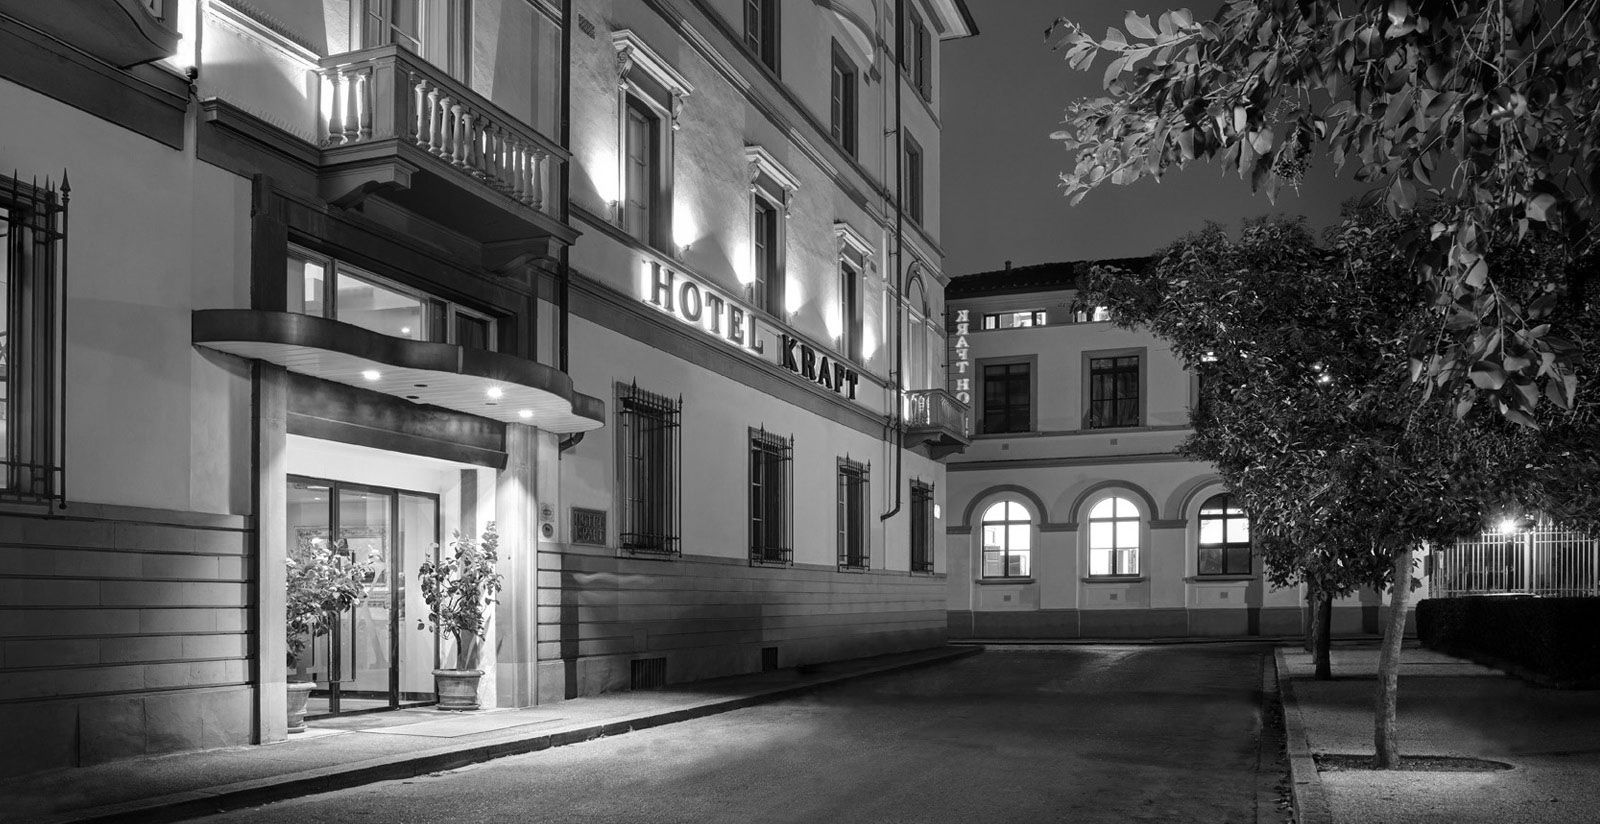 Artelinea collaboration: Hotel Kraft in the center of Florence